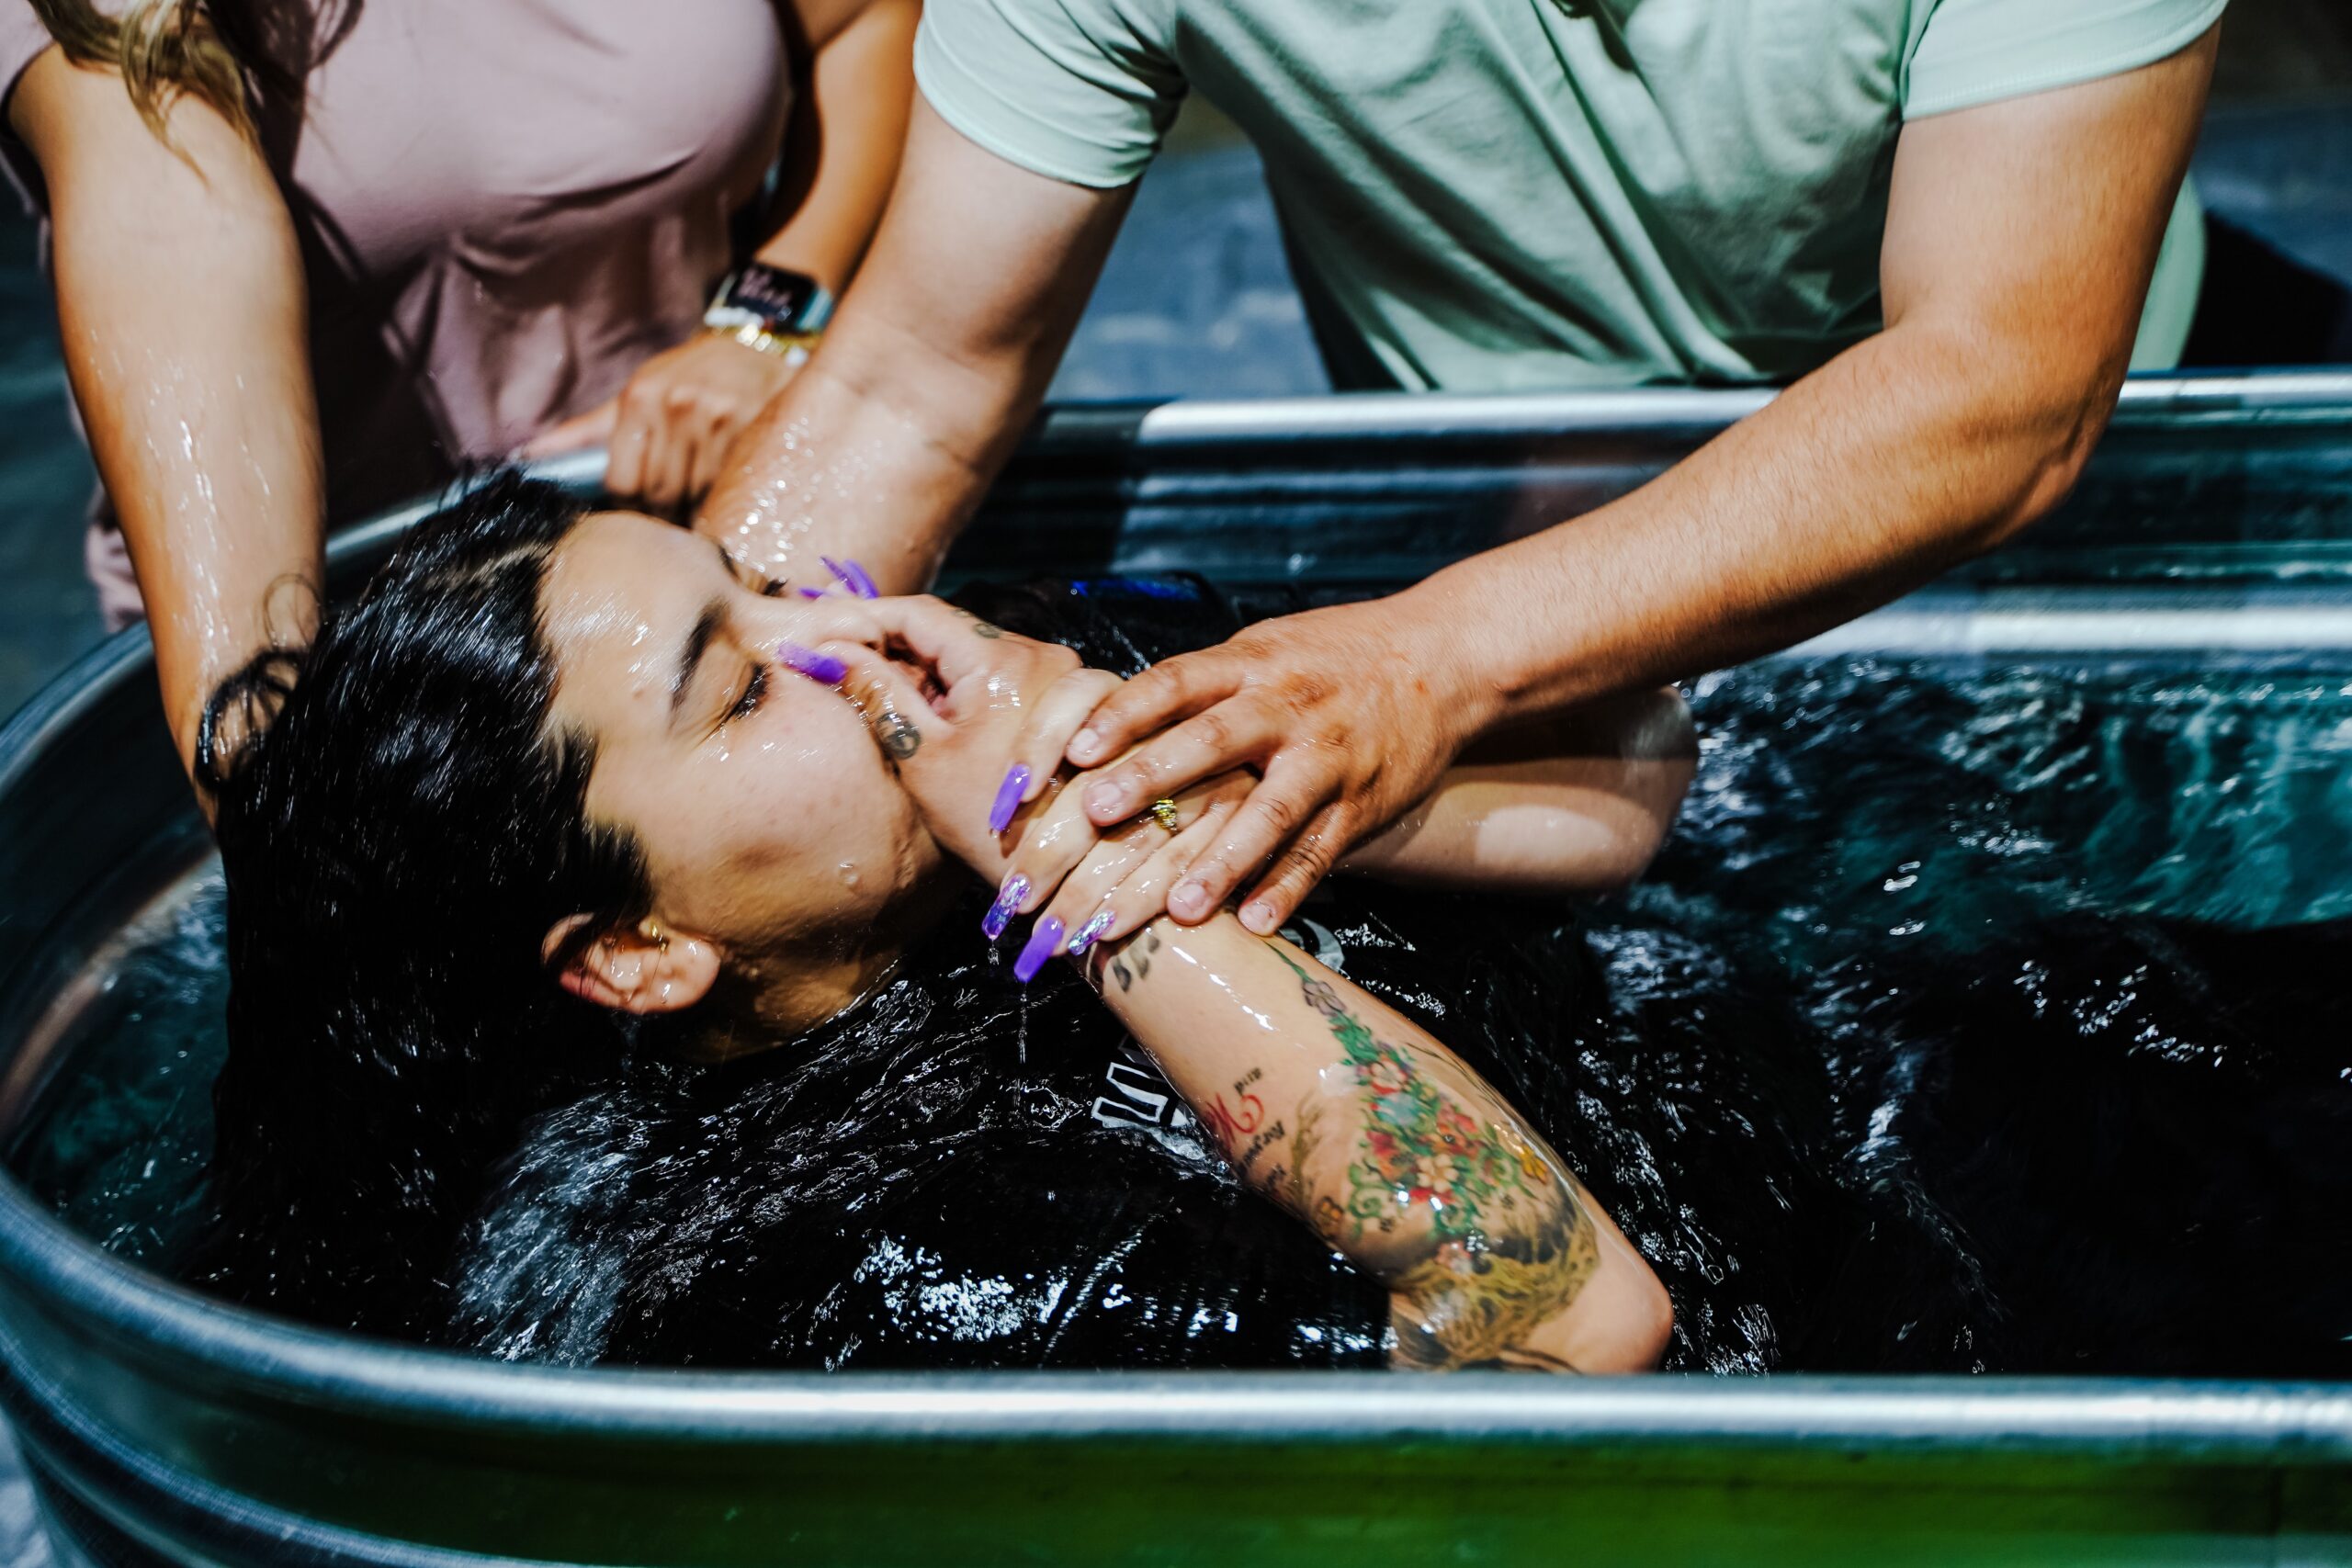 A woman being Baptized